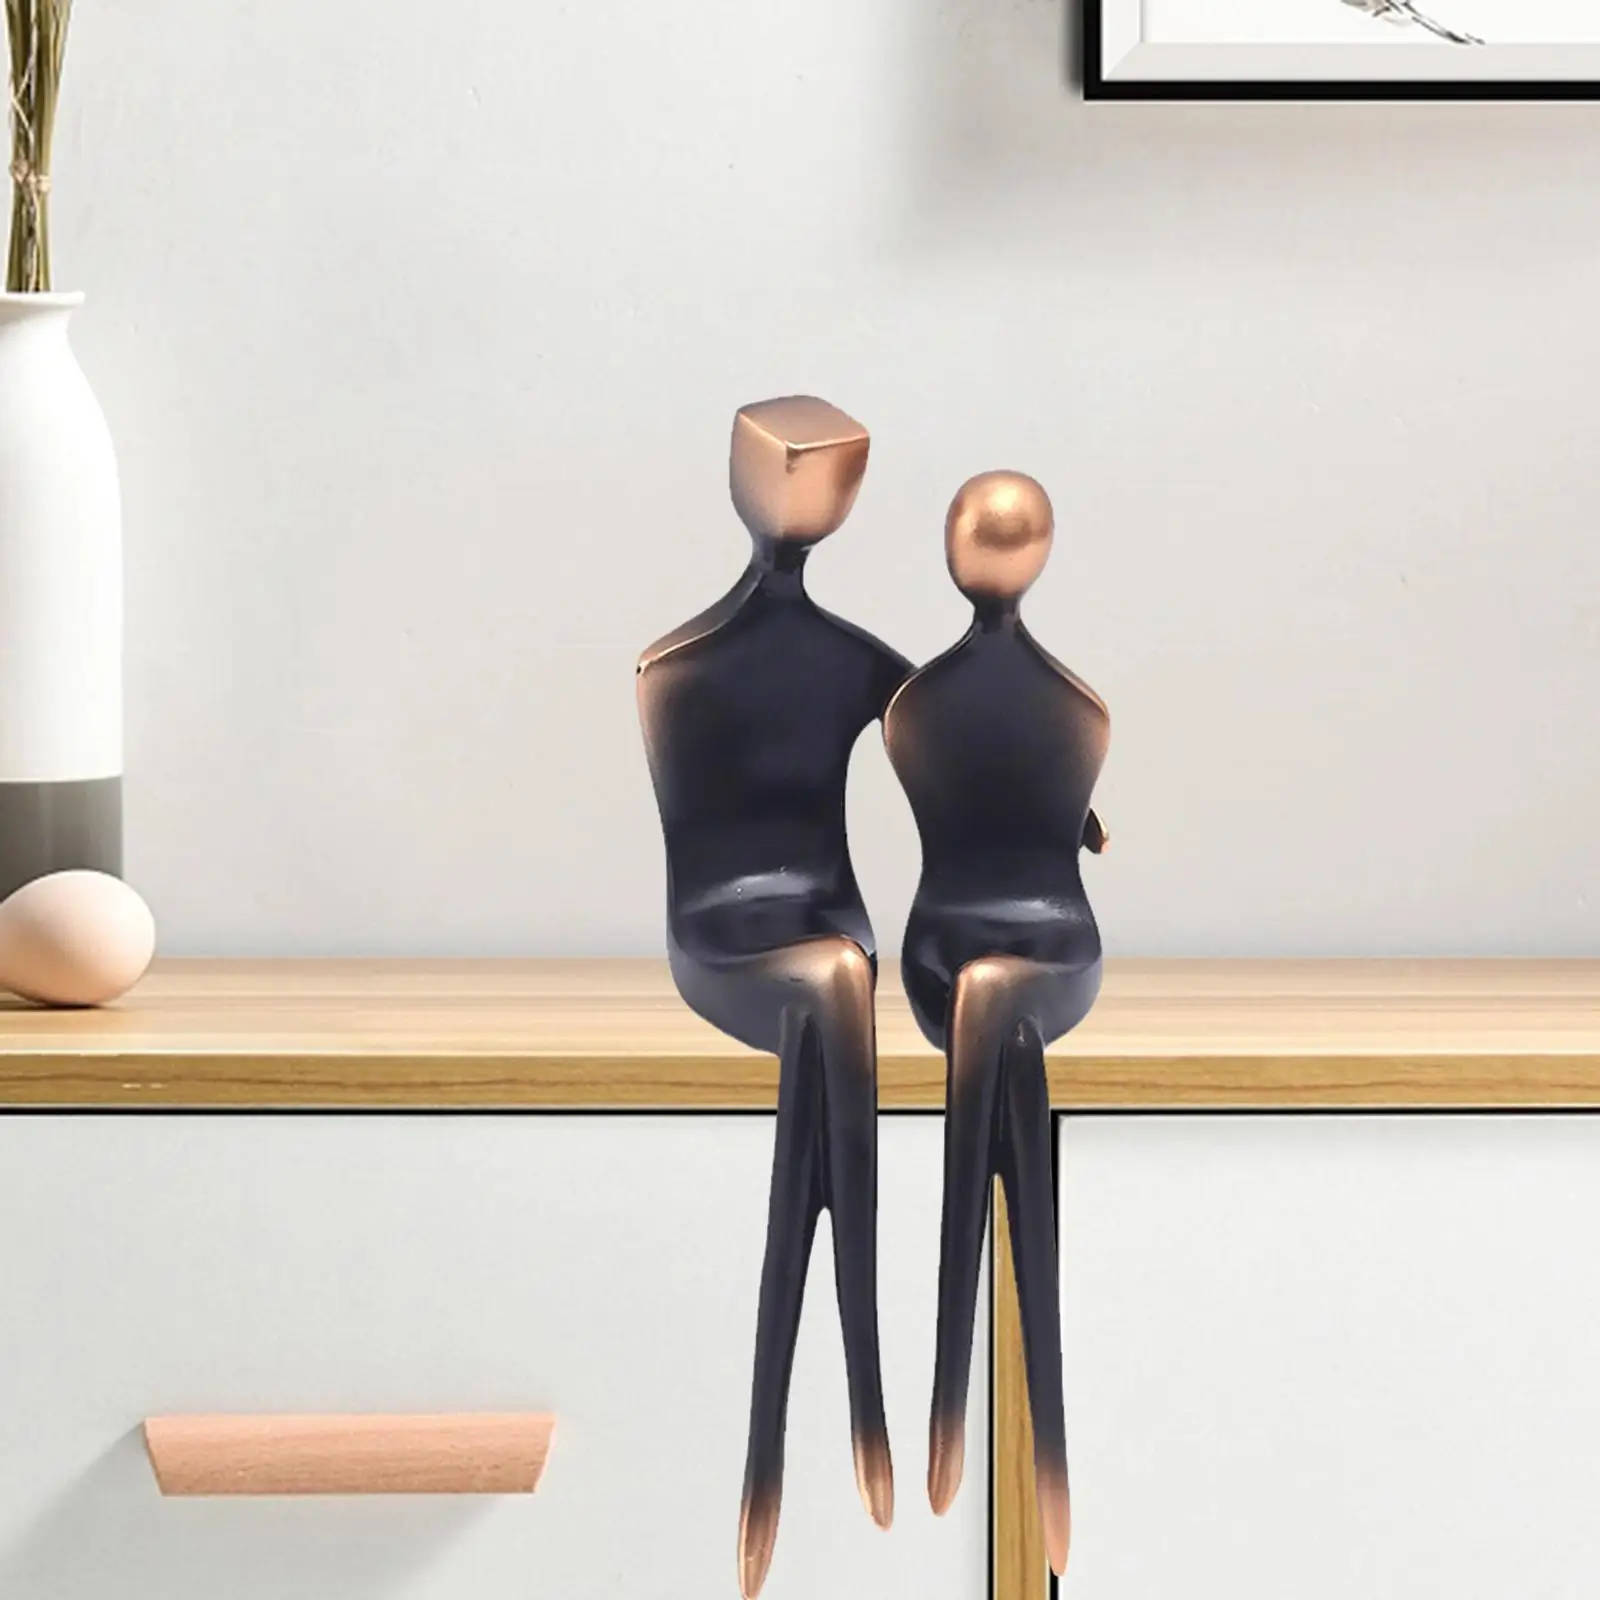 Abstract Art Figurine Handcraft Nordic Style Couple Sculpture for Living Room Cabinet Office Table Centerpiece Decoration